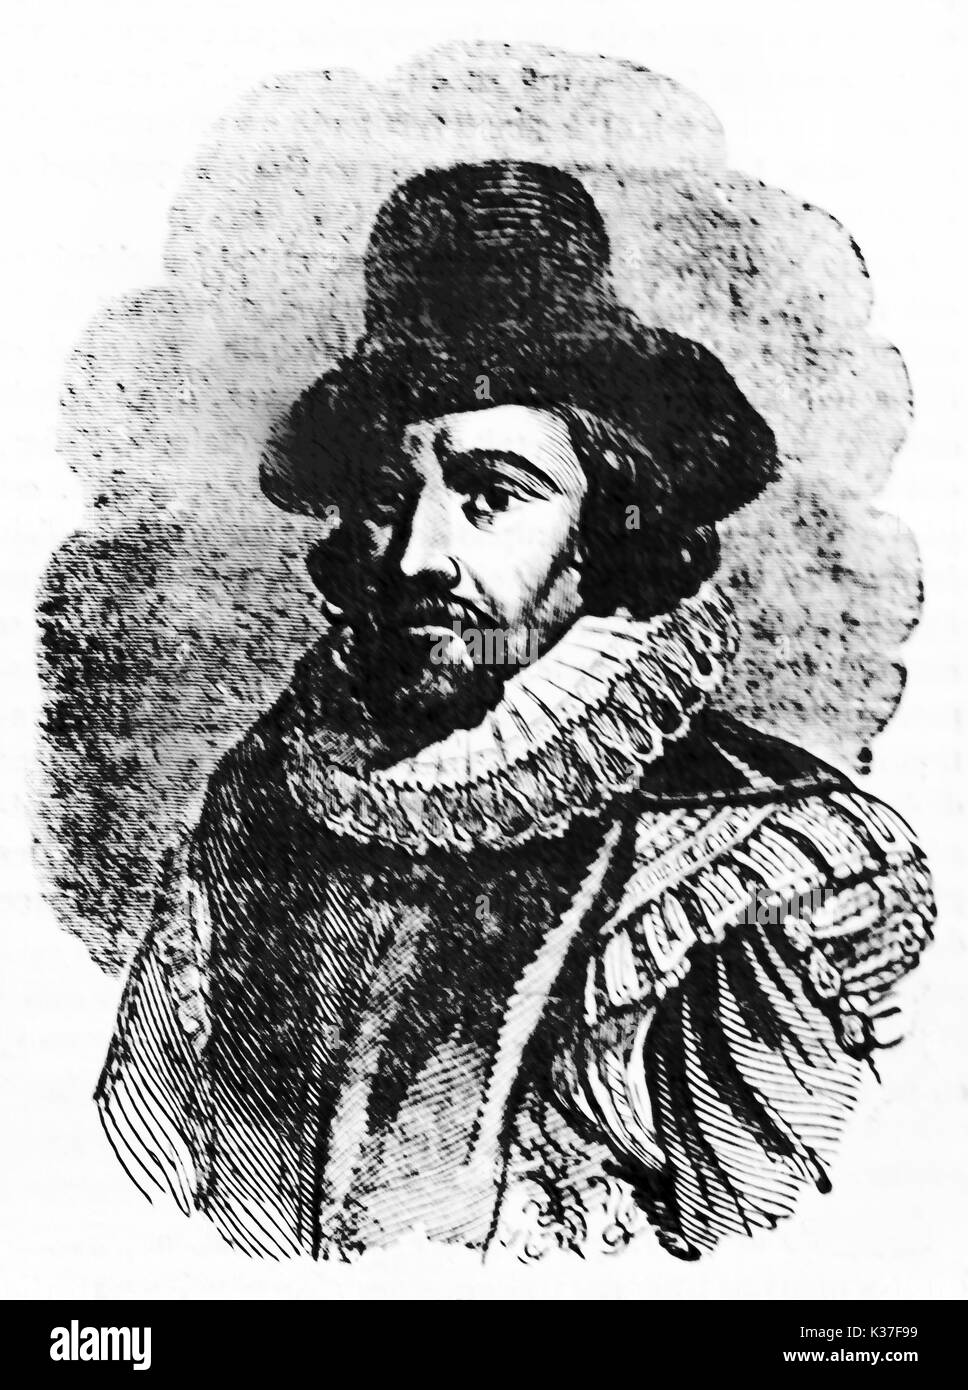 Half body rough portrait of Francis Bacon (1561 - 1626)  English philosopher and statesman. Old Illustration by Jackson published on Magasin Pittoresque Paris 1834 Stock Photo